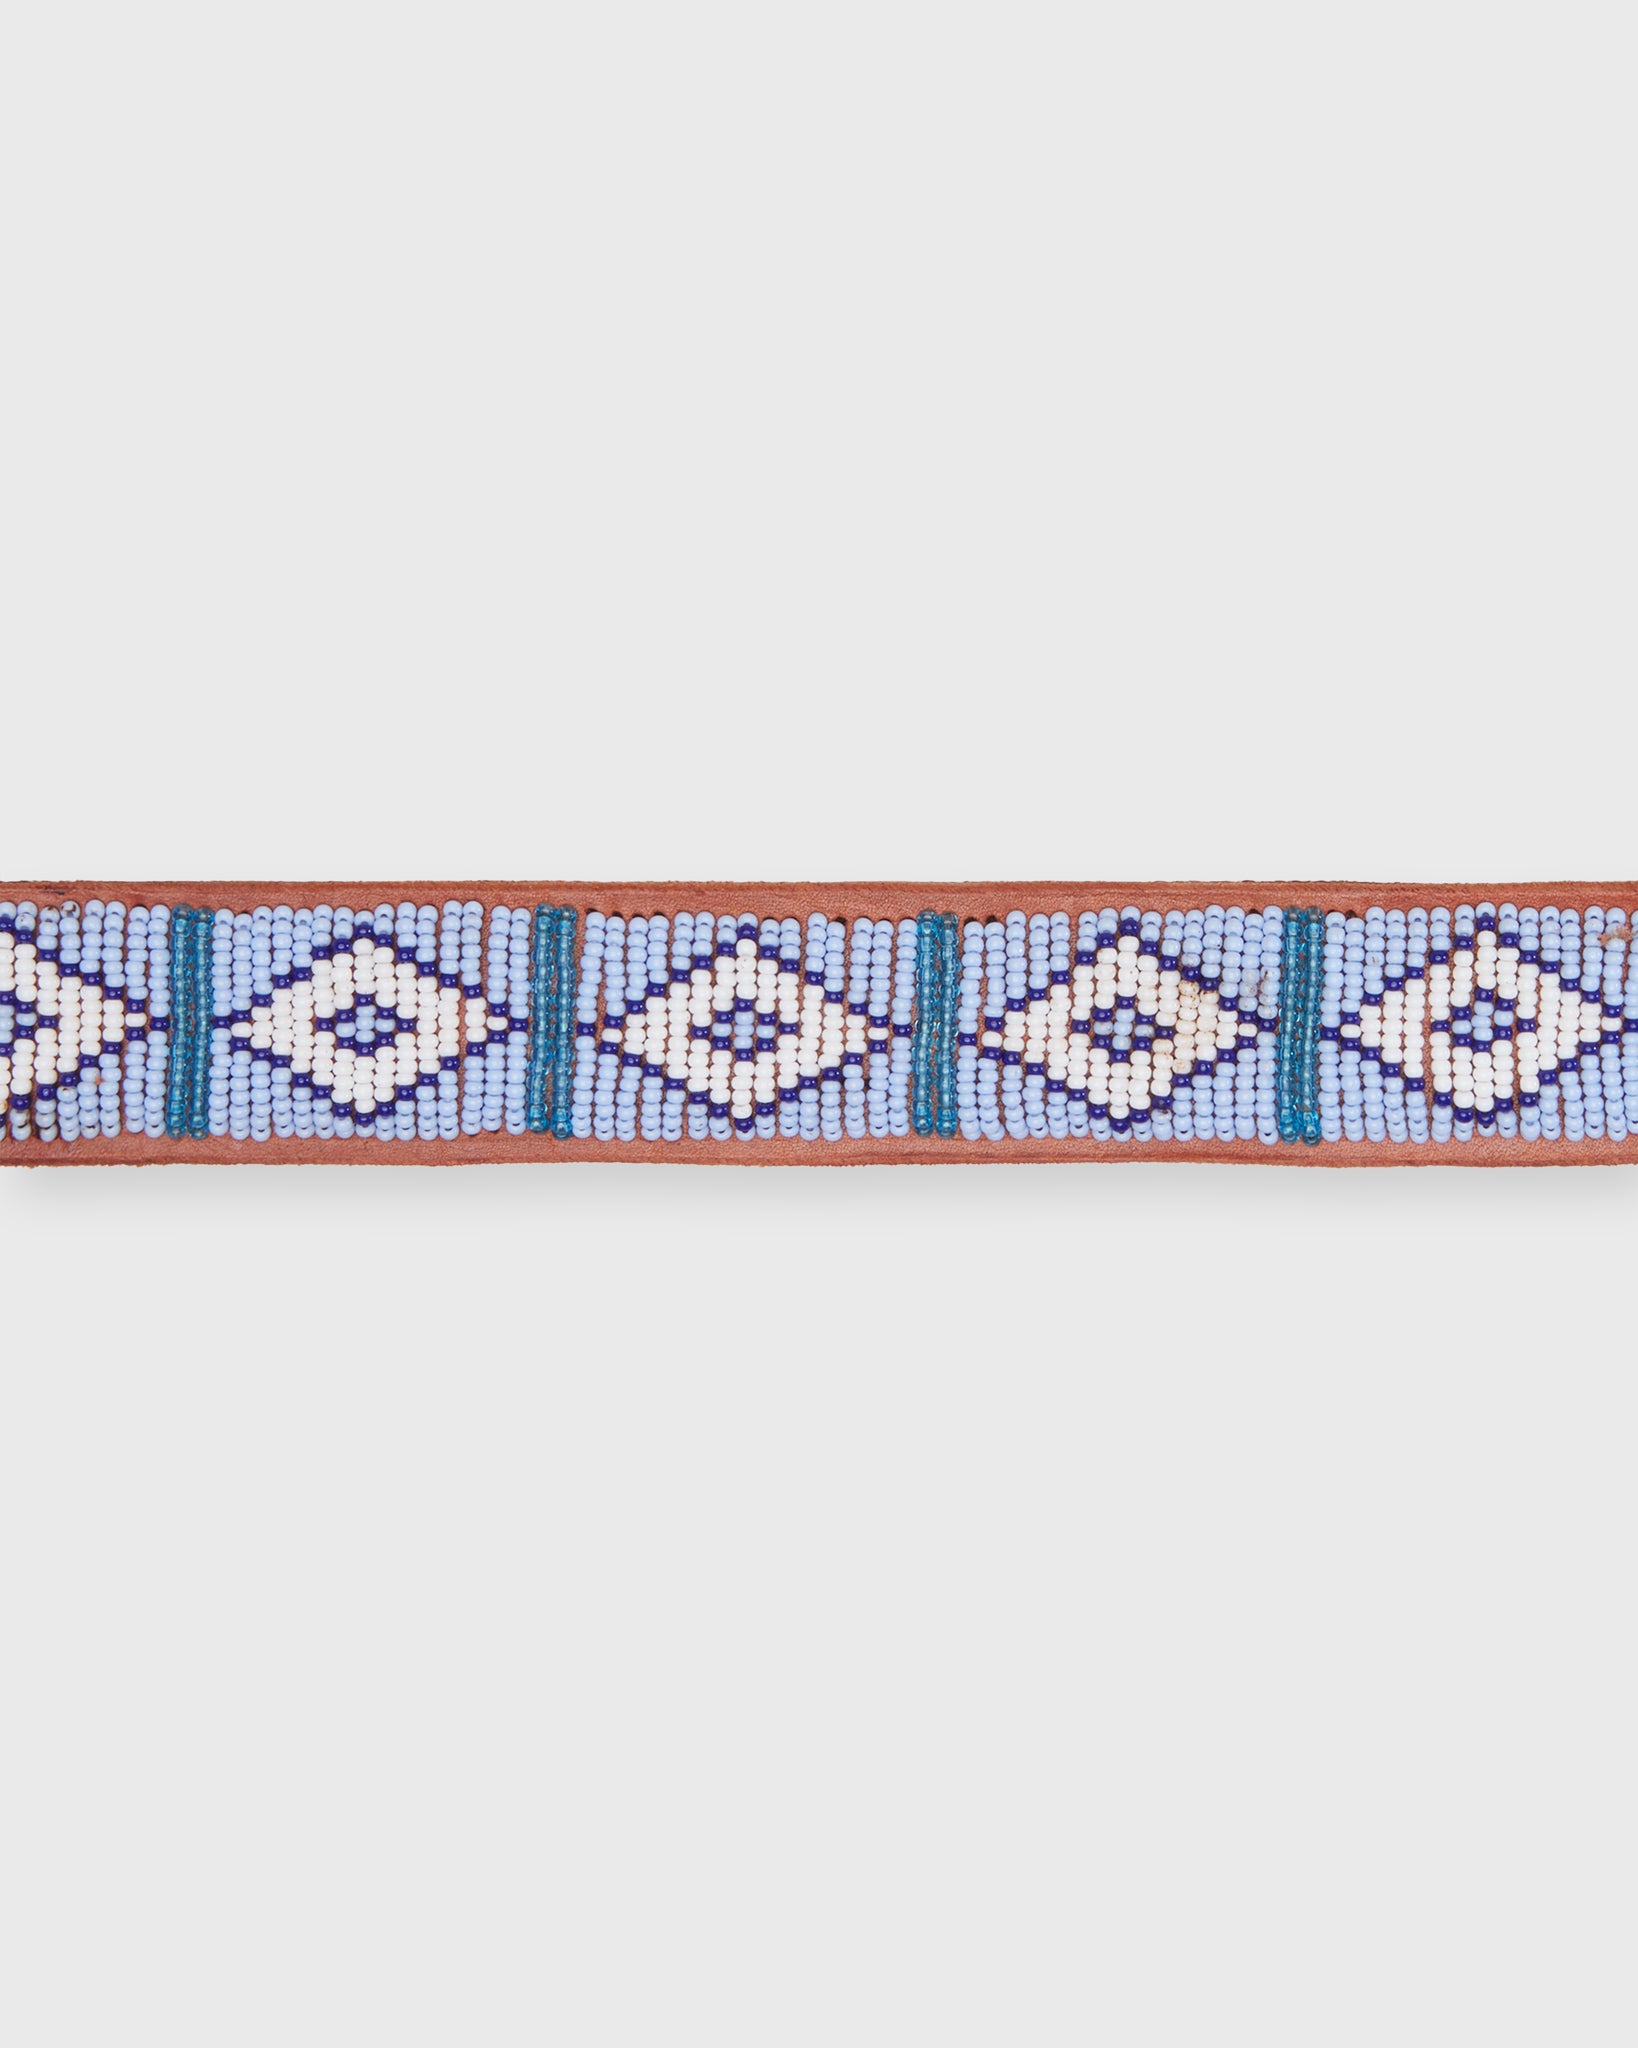 1.25" African Fully Beaded Belt in Sky Blue/White Triangle